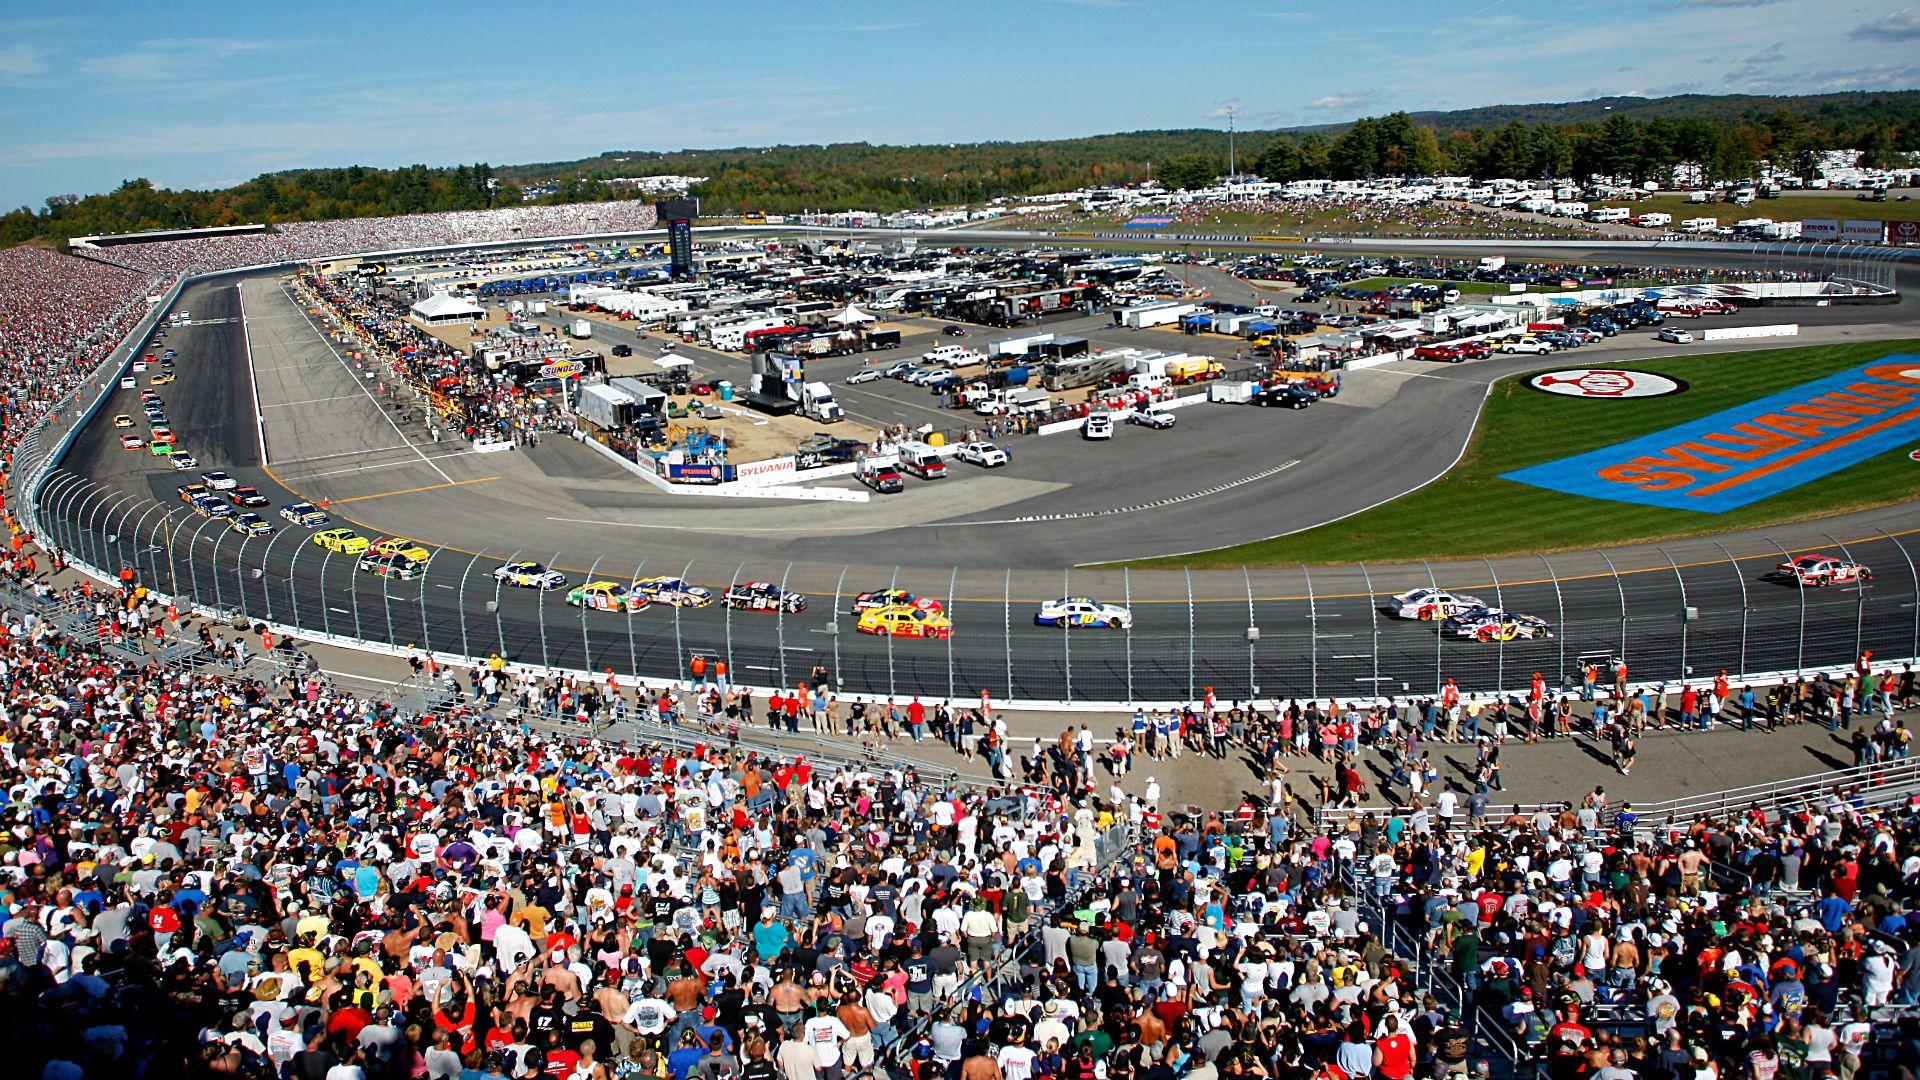 NASCAR at New Hampshire: TV schedule, dates, qualifying drivers